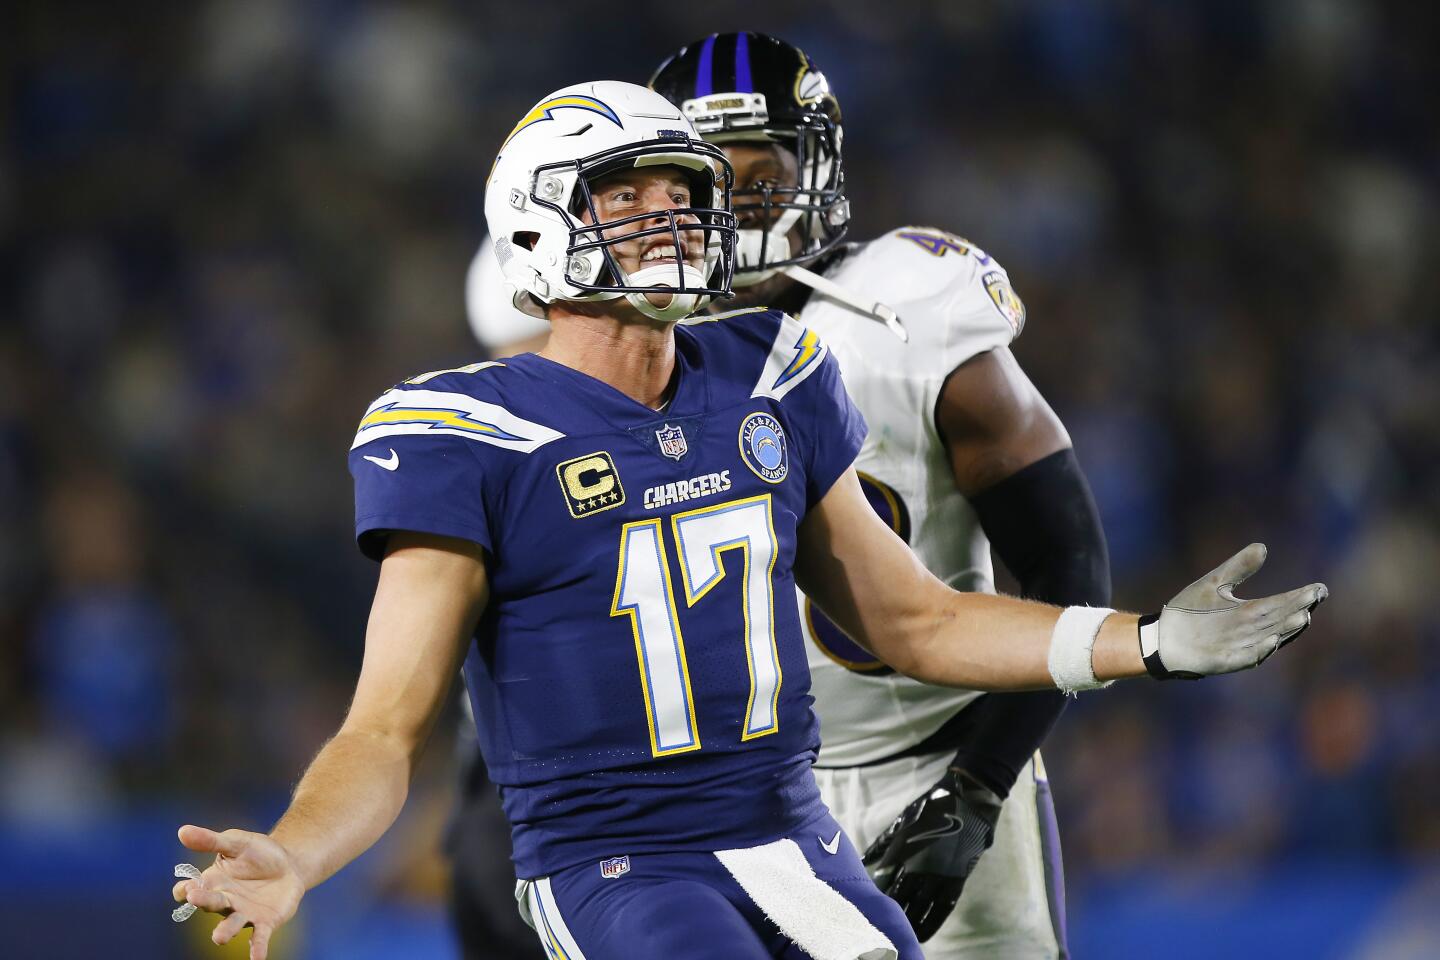 Chargers vs. Ravens 11/22/18